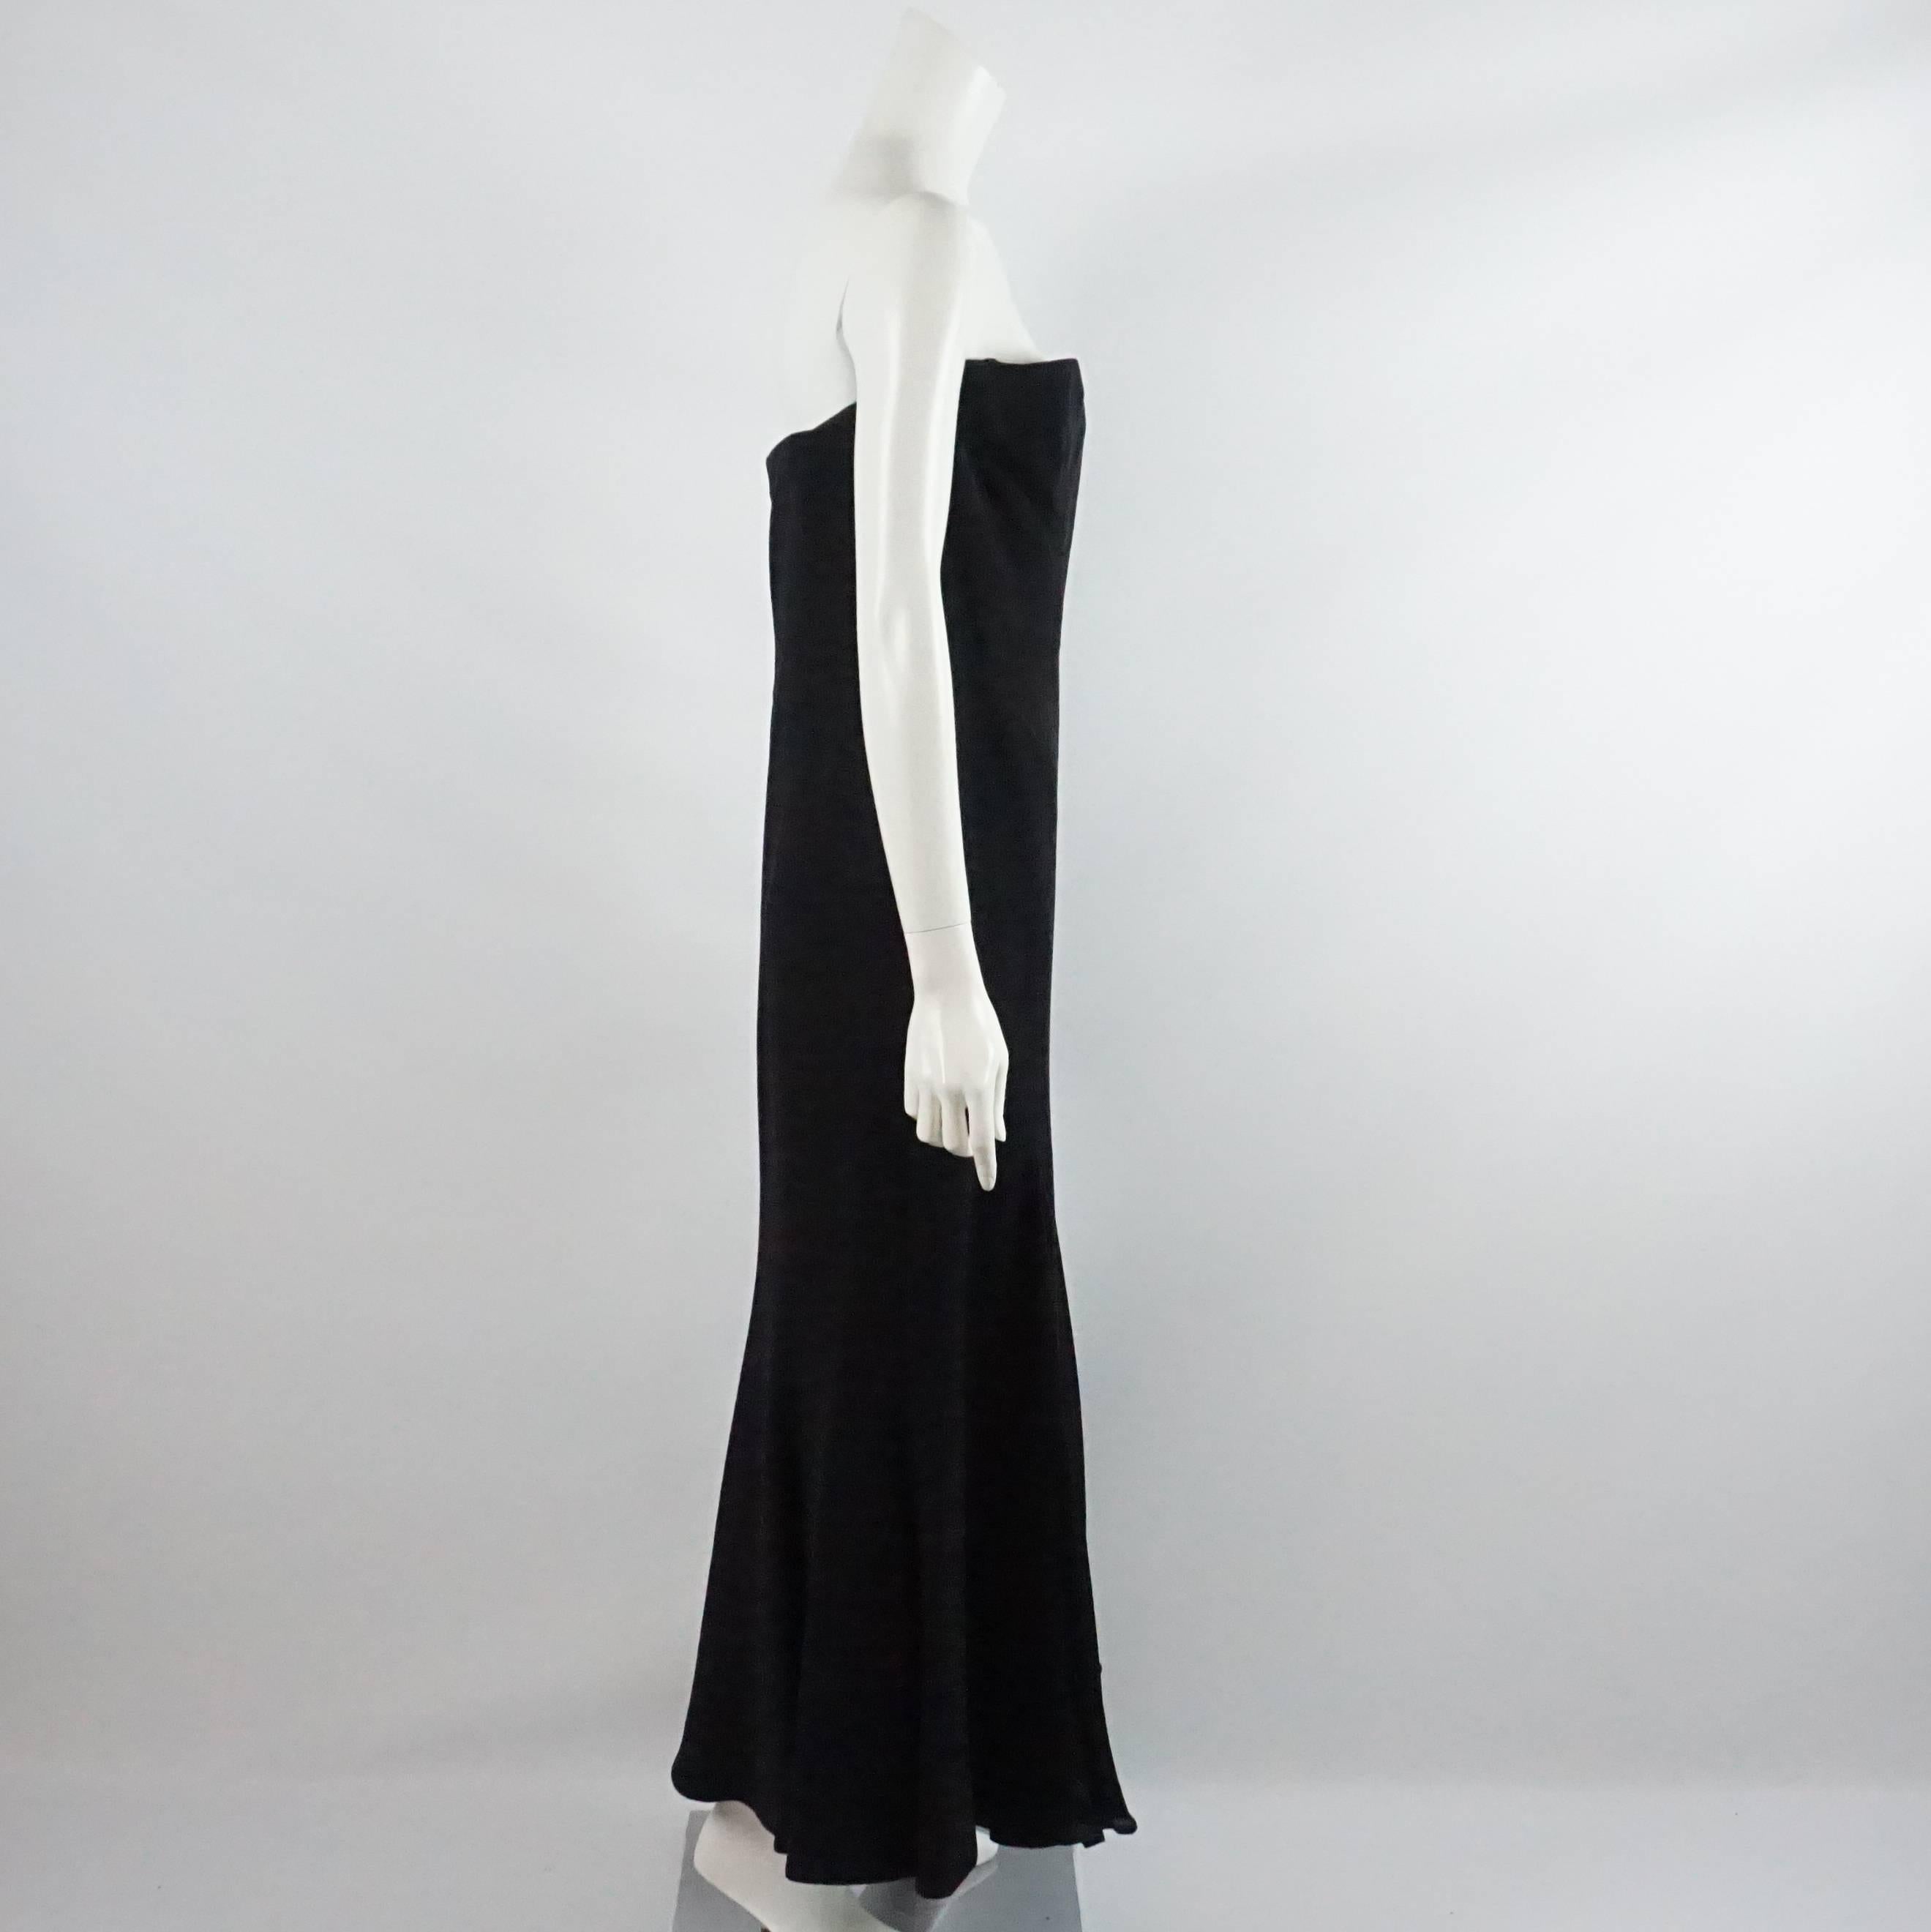 This Giorgio Armani black silk gown is strapless and has pleats. There is a back zipper. This dress is in excellent condition.

Measurements
Bust: 34